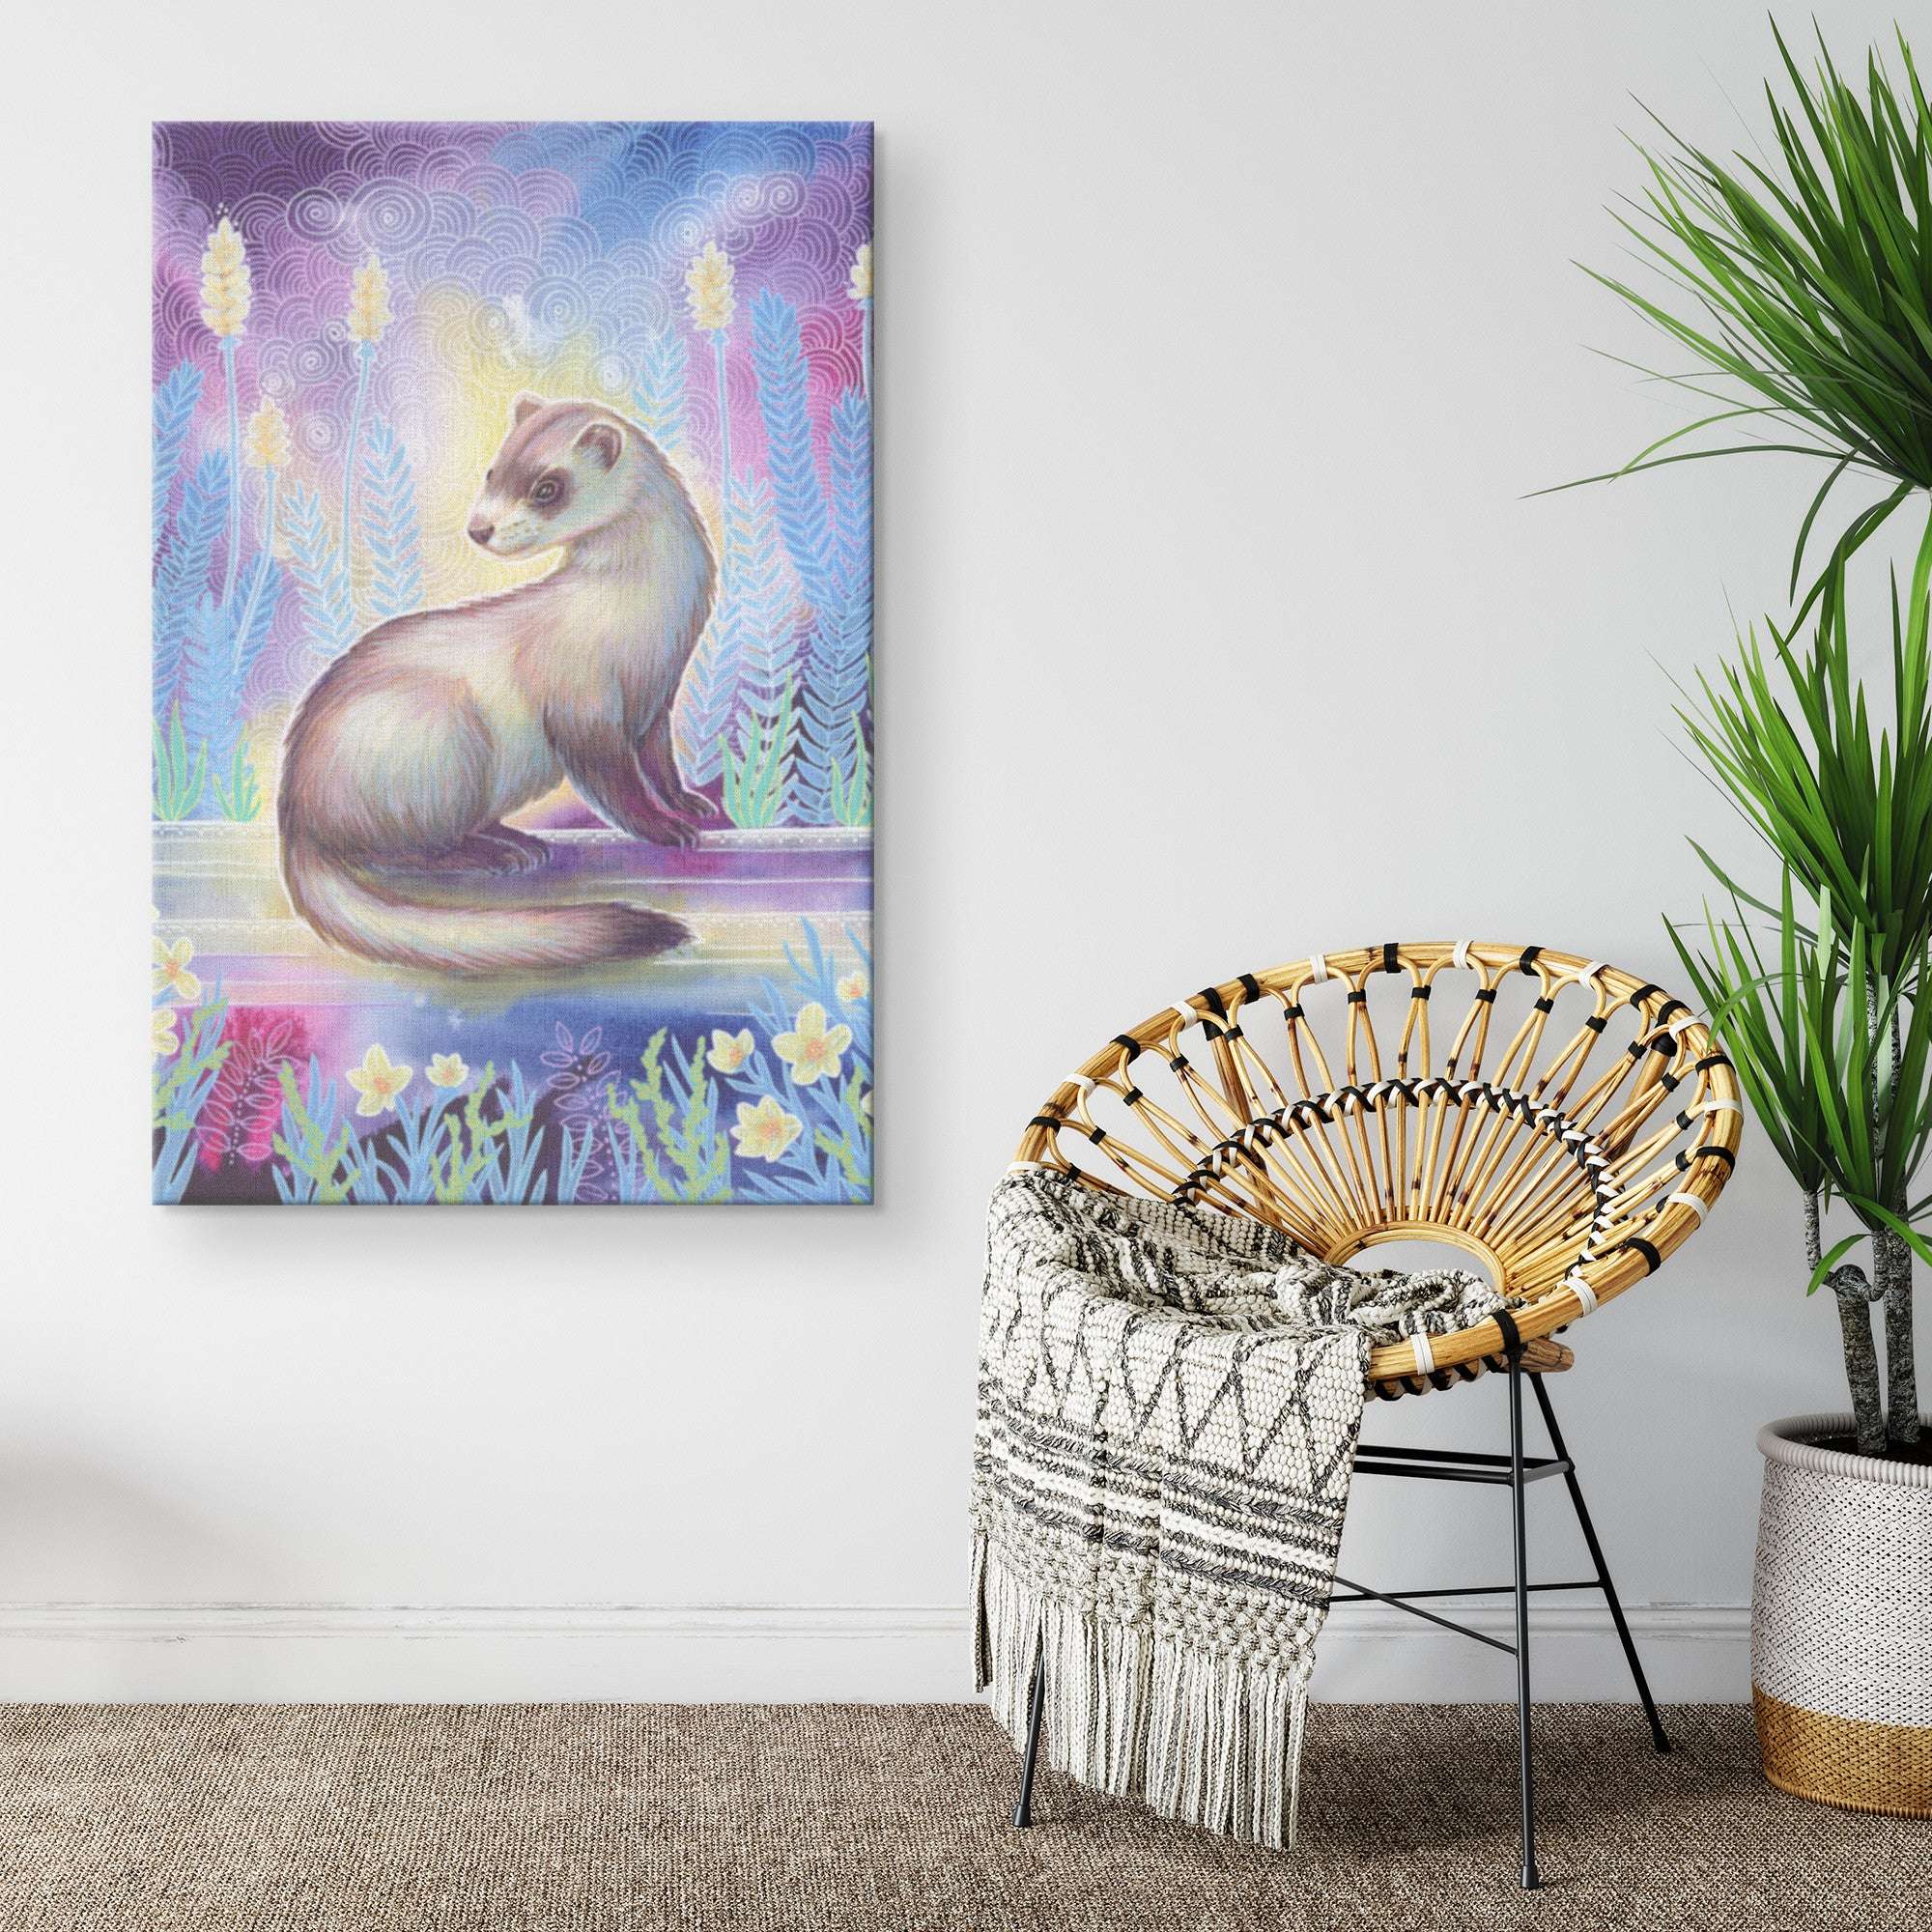 A vibrant painting of a ferret on a Canvas Print hanging on a wall beside a wicker chair with a cozy blanket, all against a white wall and wooden floor.